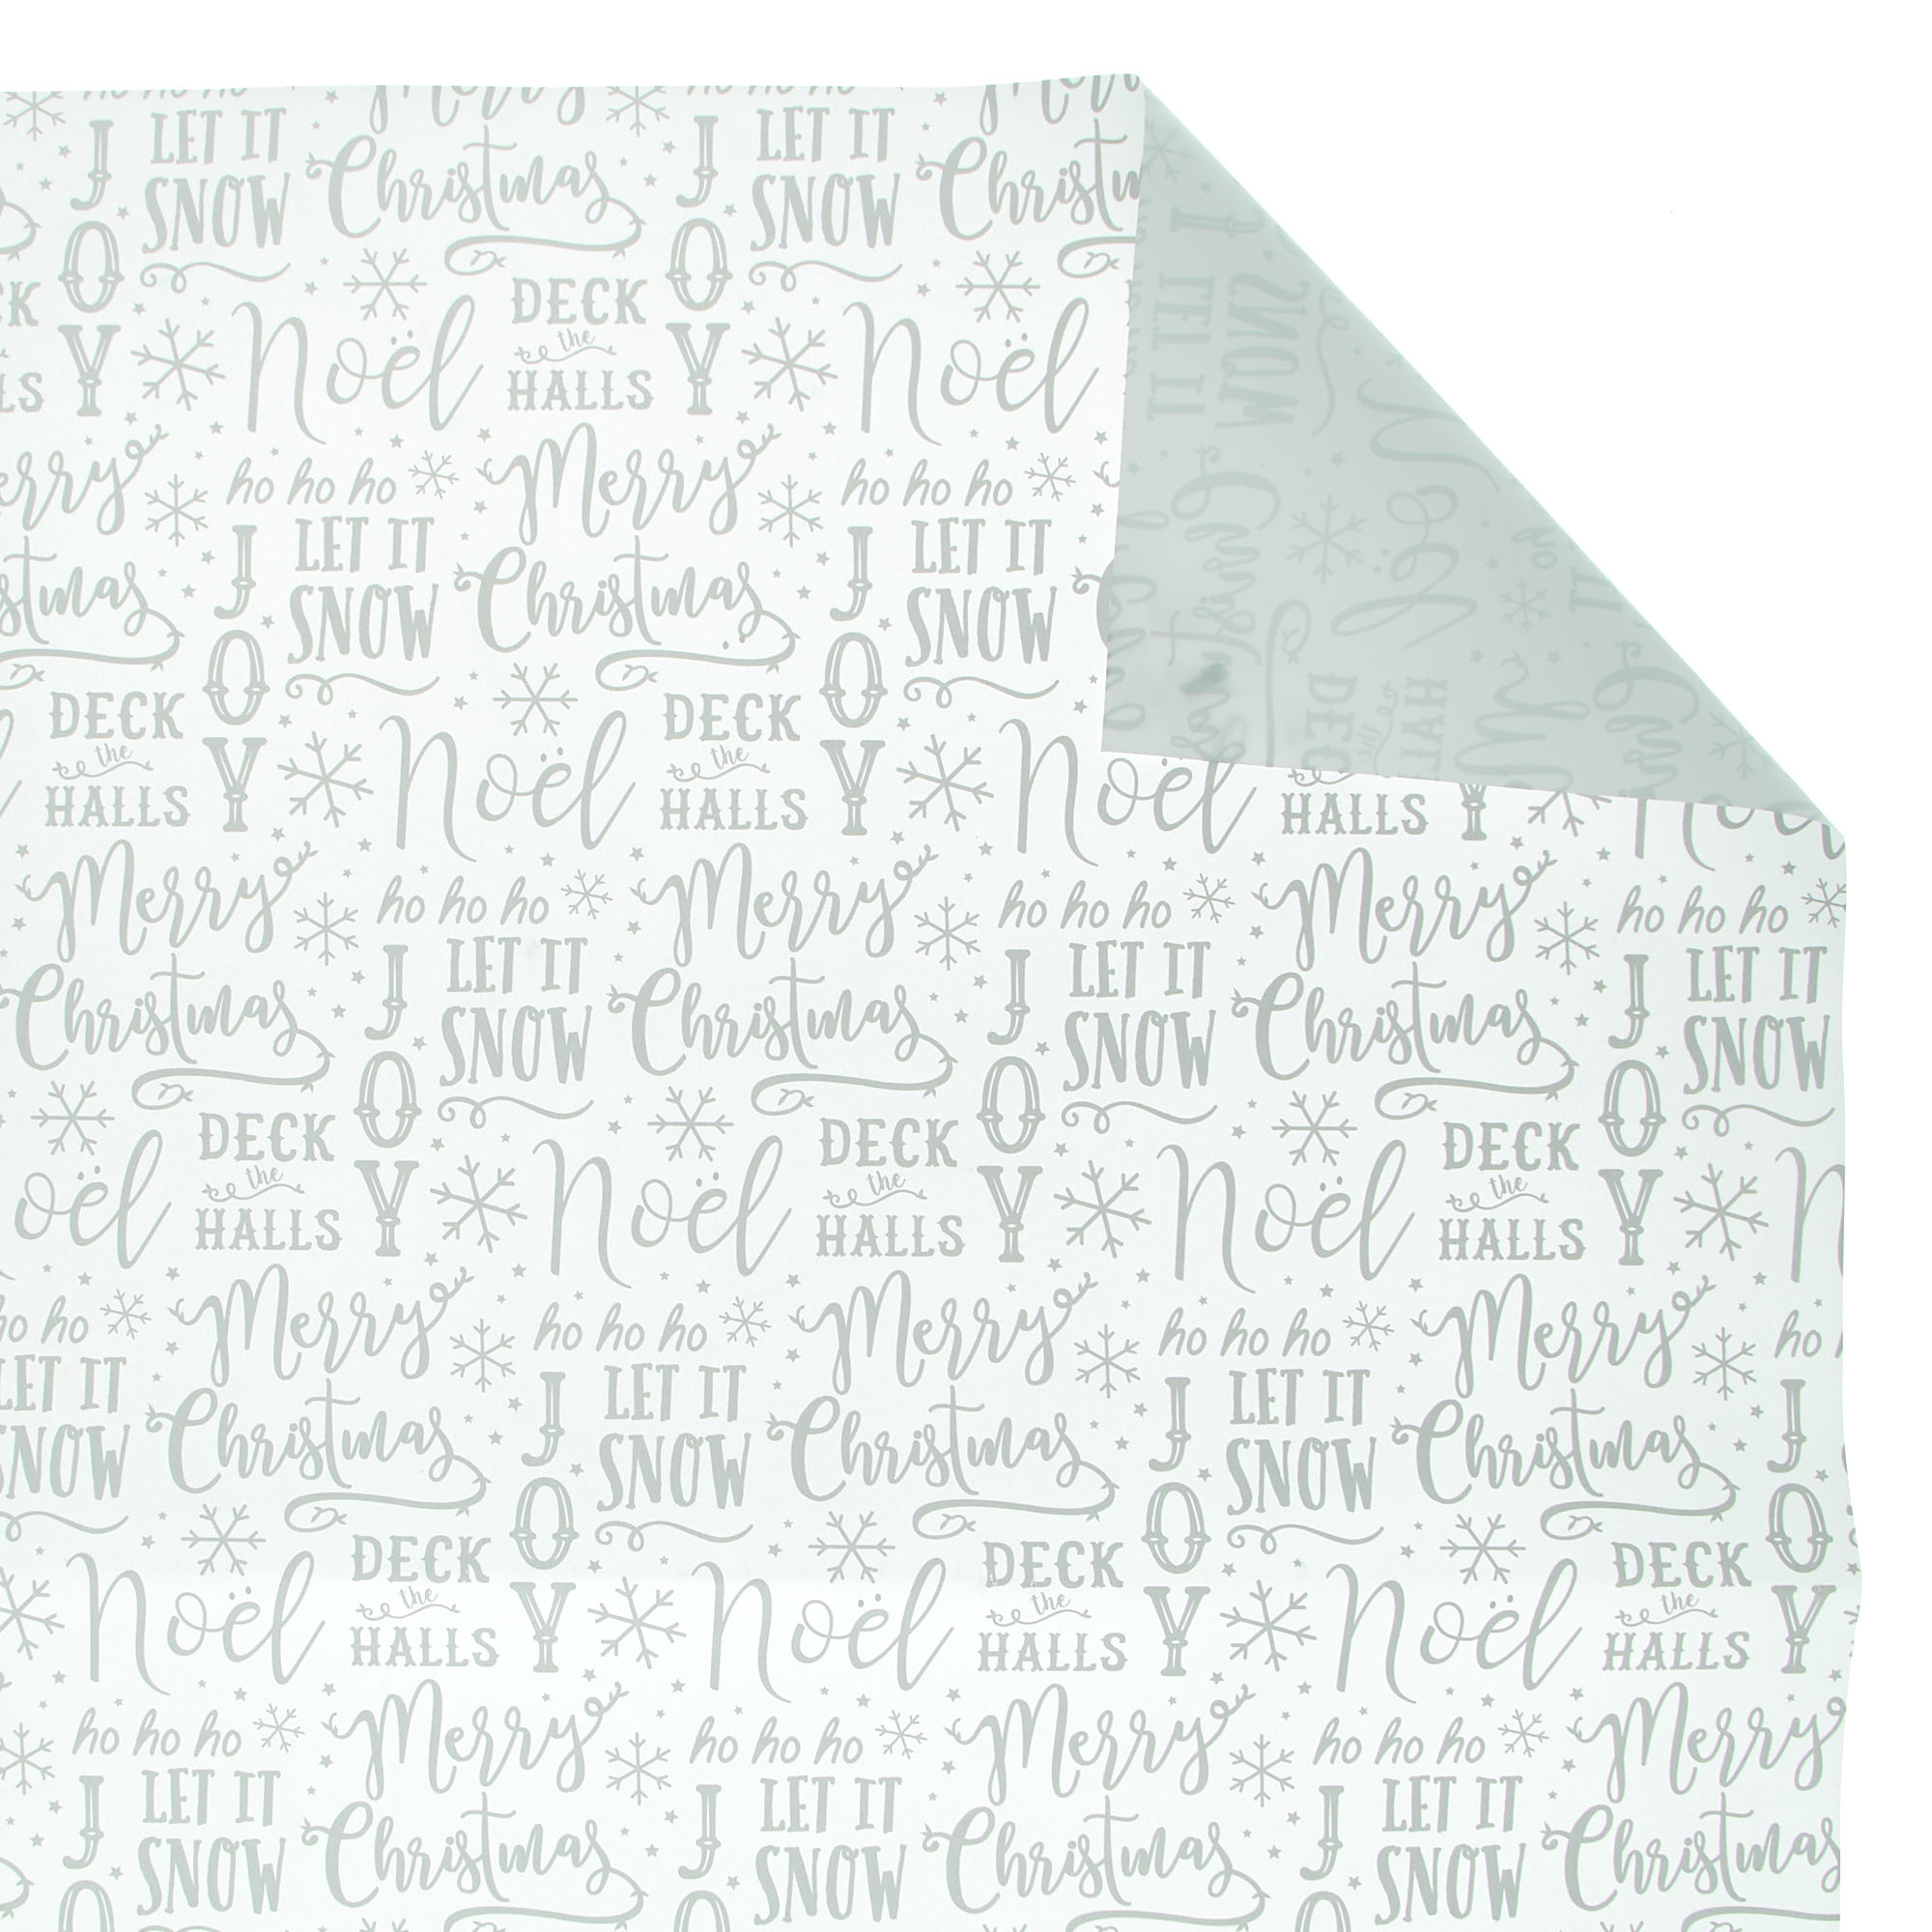 Let It Snow Christmas Wrapping Paper - 10 Sheets